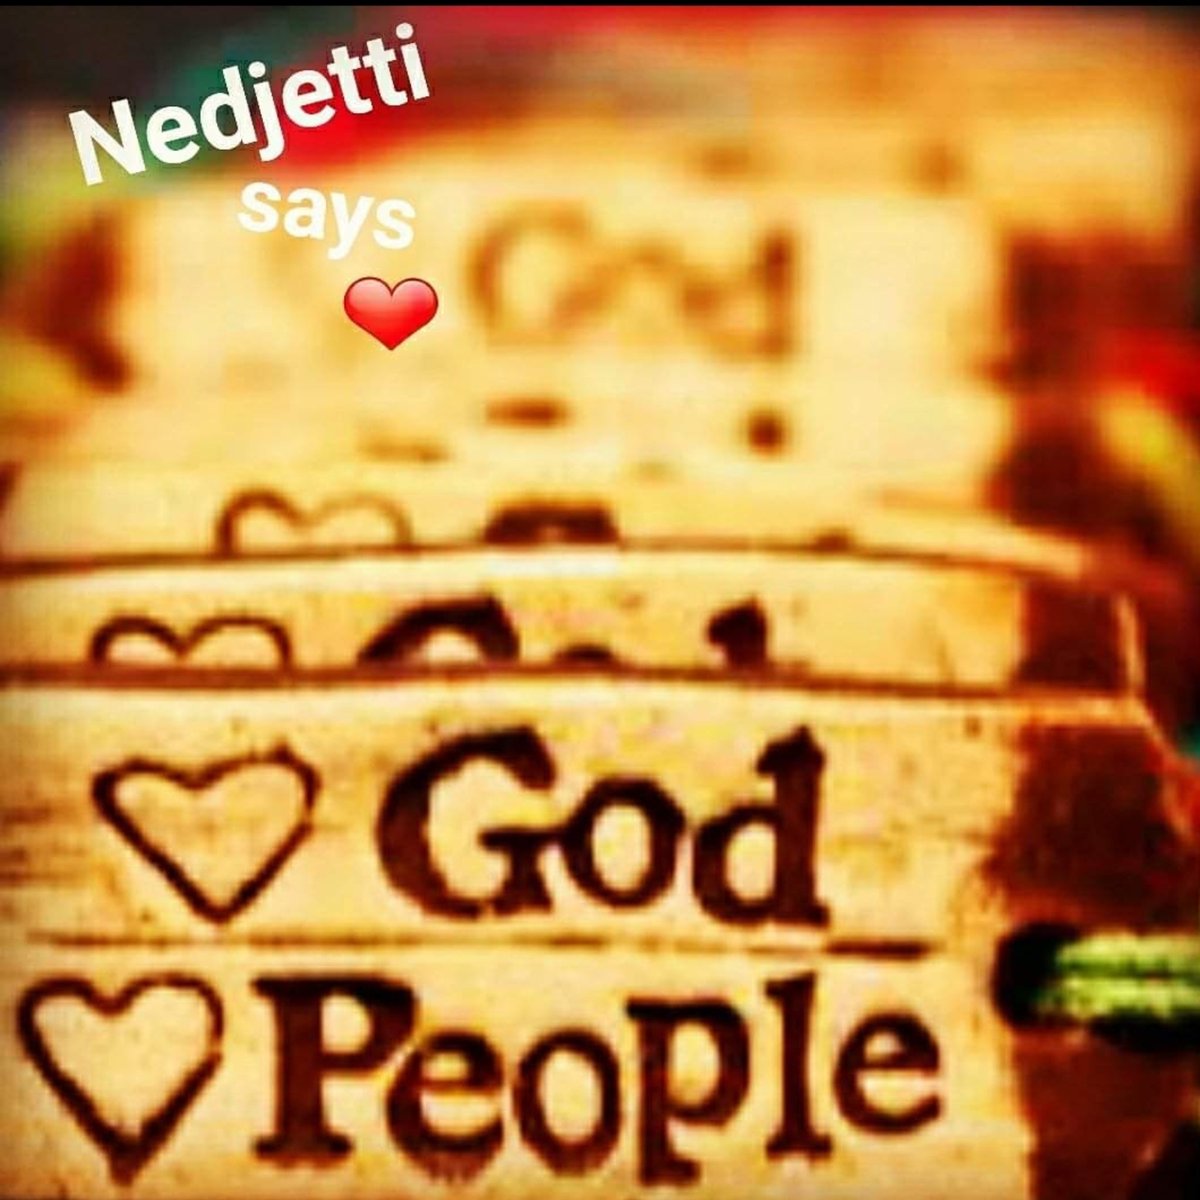 Each #Blessed day🙏🏿

➡ #LoveGOD ❤ #God

#ThankGod ☝🏽 

#LoveYourself 💜 

#LovePeople 💞 

#LoveOthers 💛

 #BeKind ✌🏾

#Smile 😊 

#Laugh 😄

#WalkYourGreatness 👣 

#BeCompassionate 🌼

 #BeGrateful 🙌🏾 

#LoveLife 💐 

#BeYOU 👑

💓 #Nedjetti